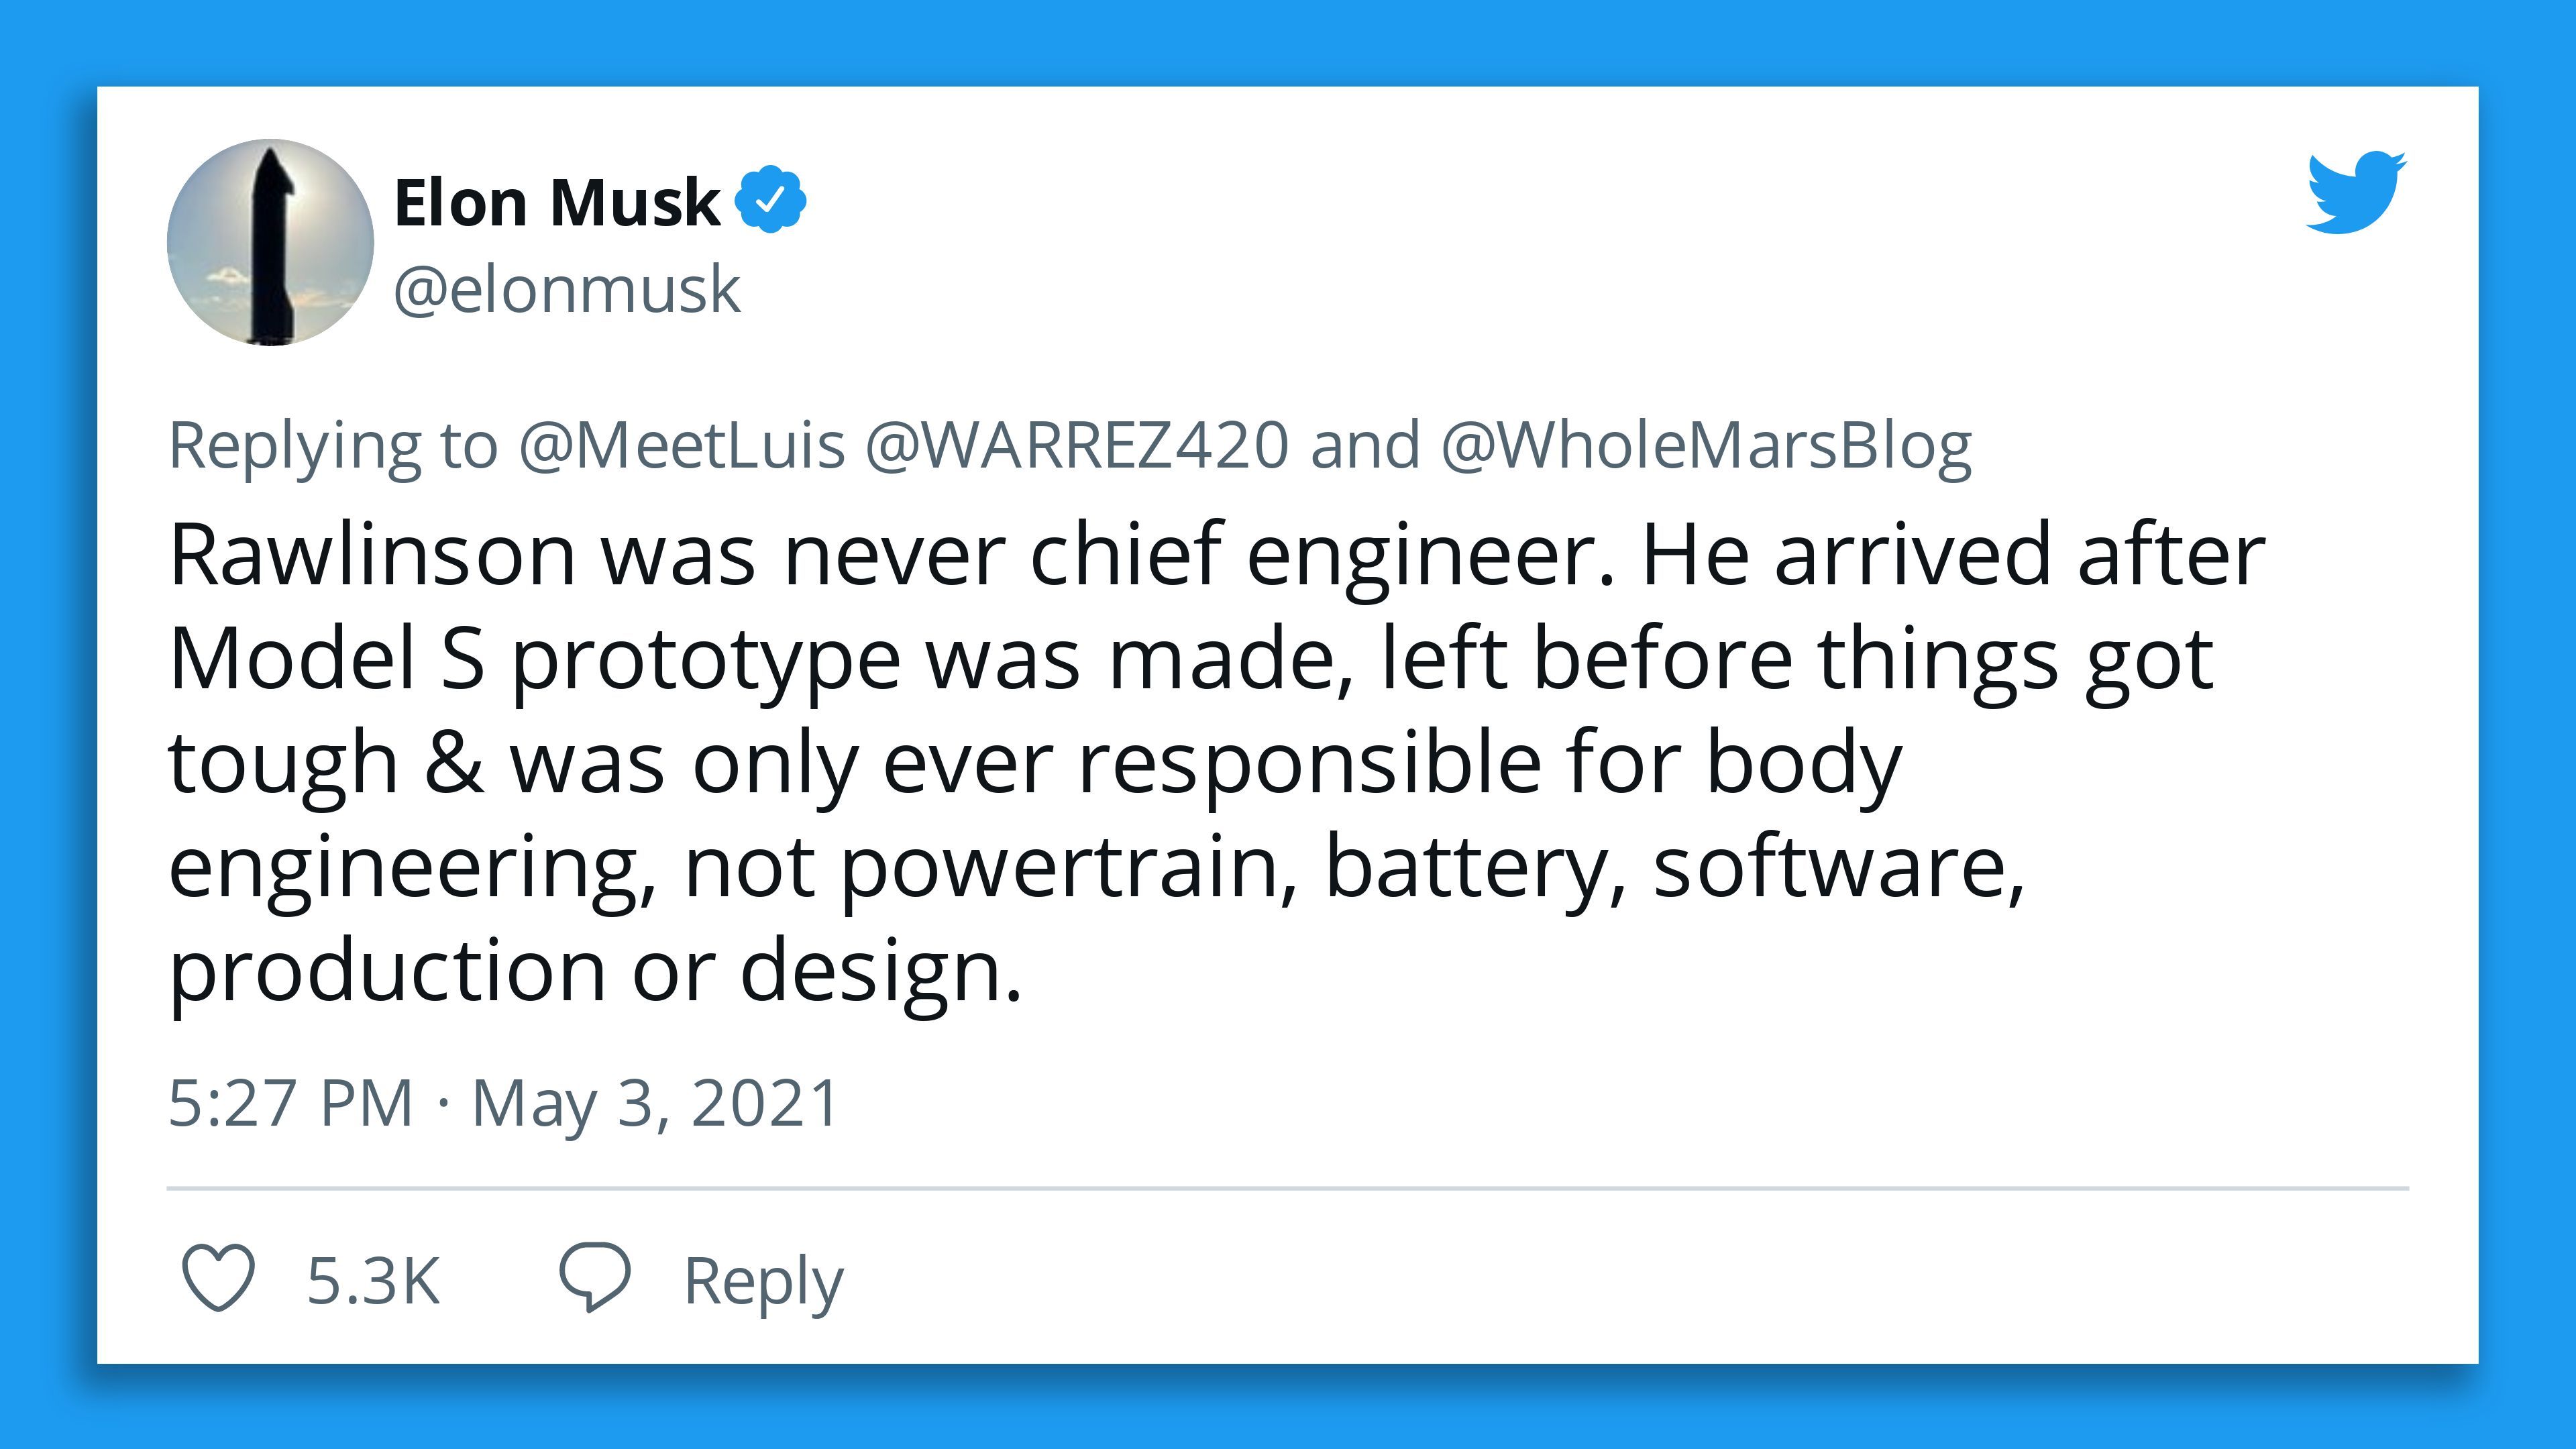 Image of an Elon Musk tweet downplaying the role of Lucid Motors CEO during his days at Tesla